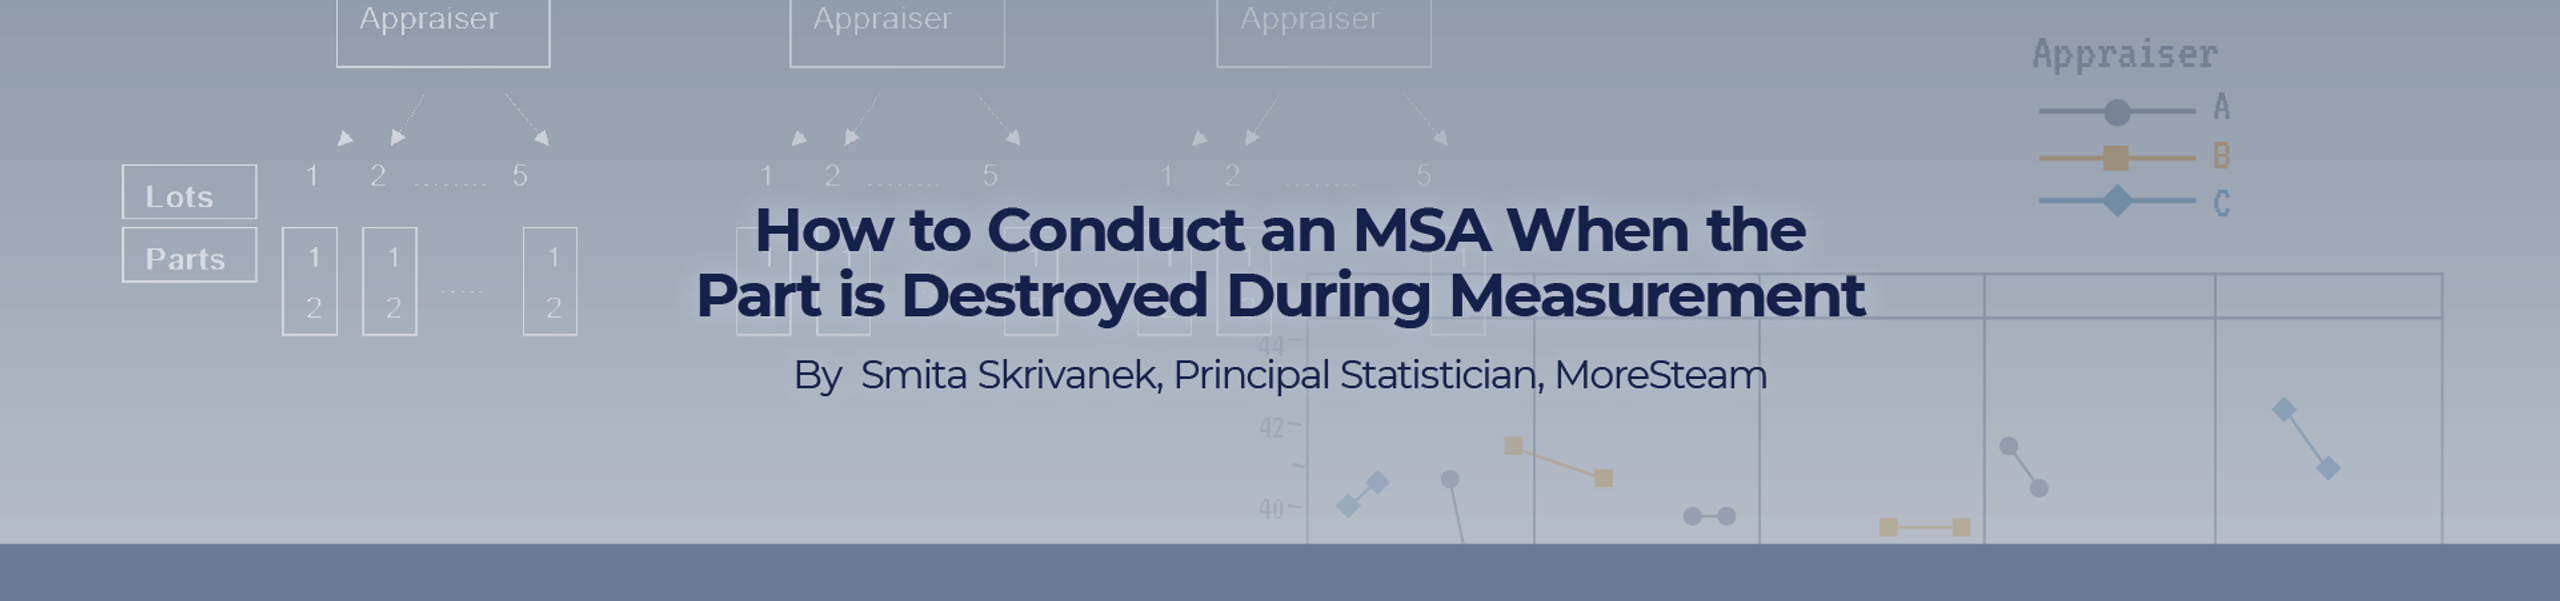 How to conduct an MSA when the part is destroyed during measurement